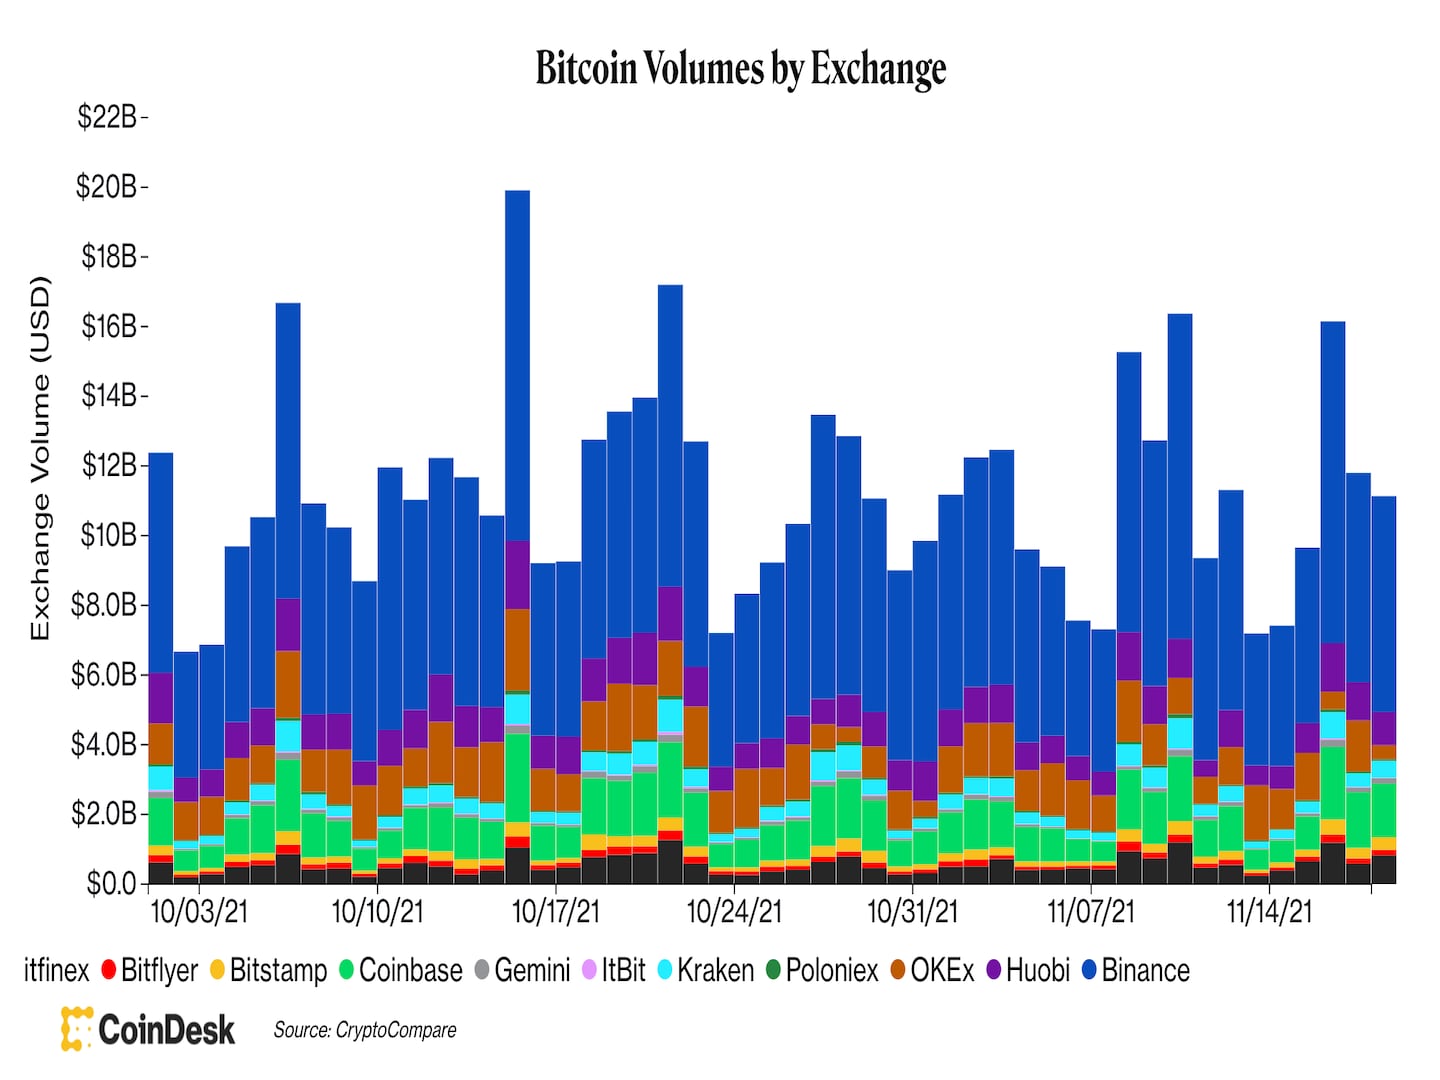 Bitcoin trading volumes by exchange (CoinDesk, CryptoCompare)